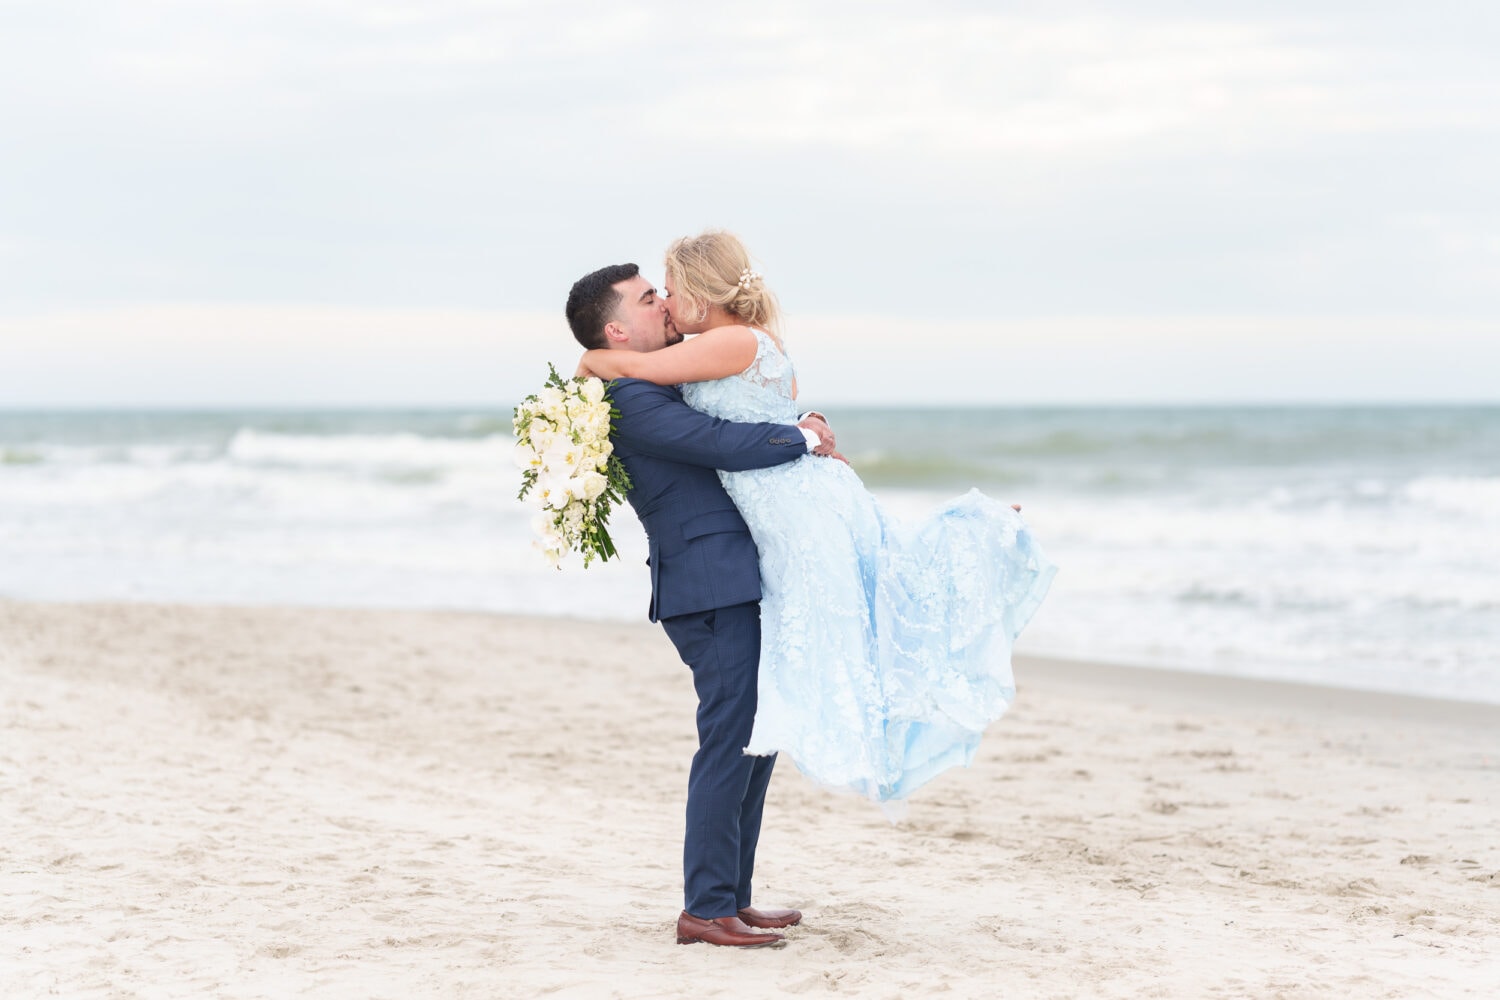 Lifting bride into the air for a kiss - Hilton Myrtle Beach Resort